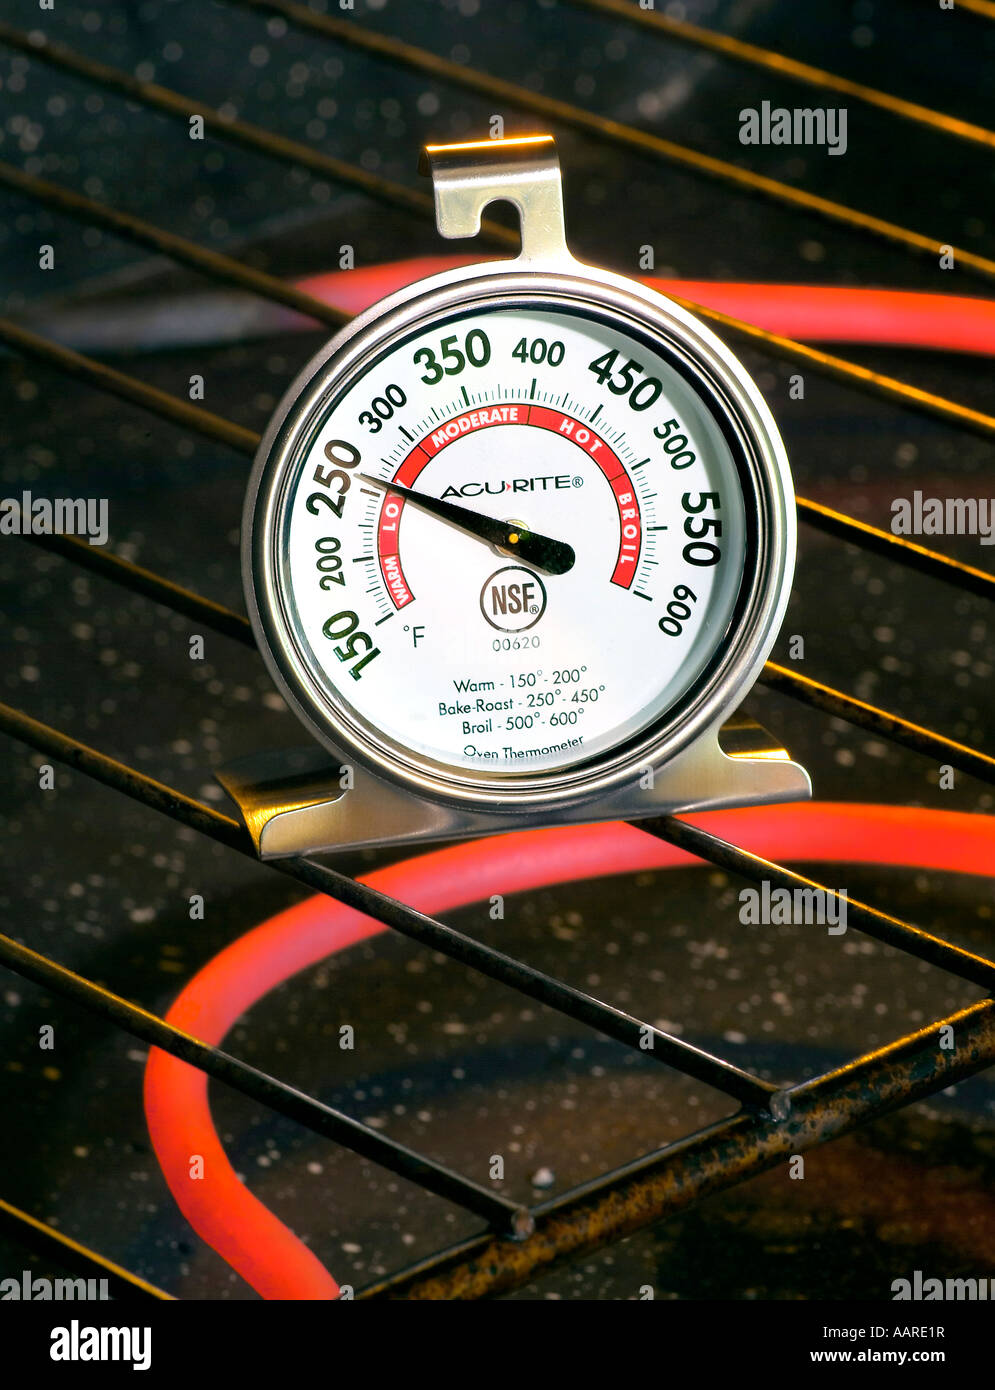 https://c8.alamy.com/comp/AARE1R/oven-thermometer-AARE1R.jpg